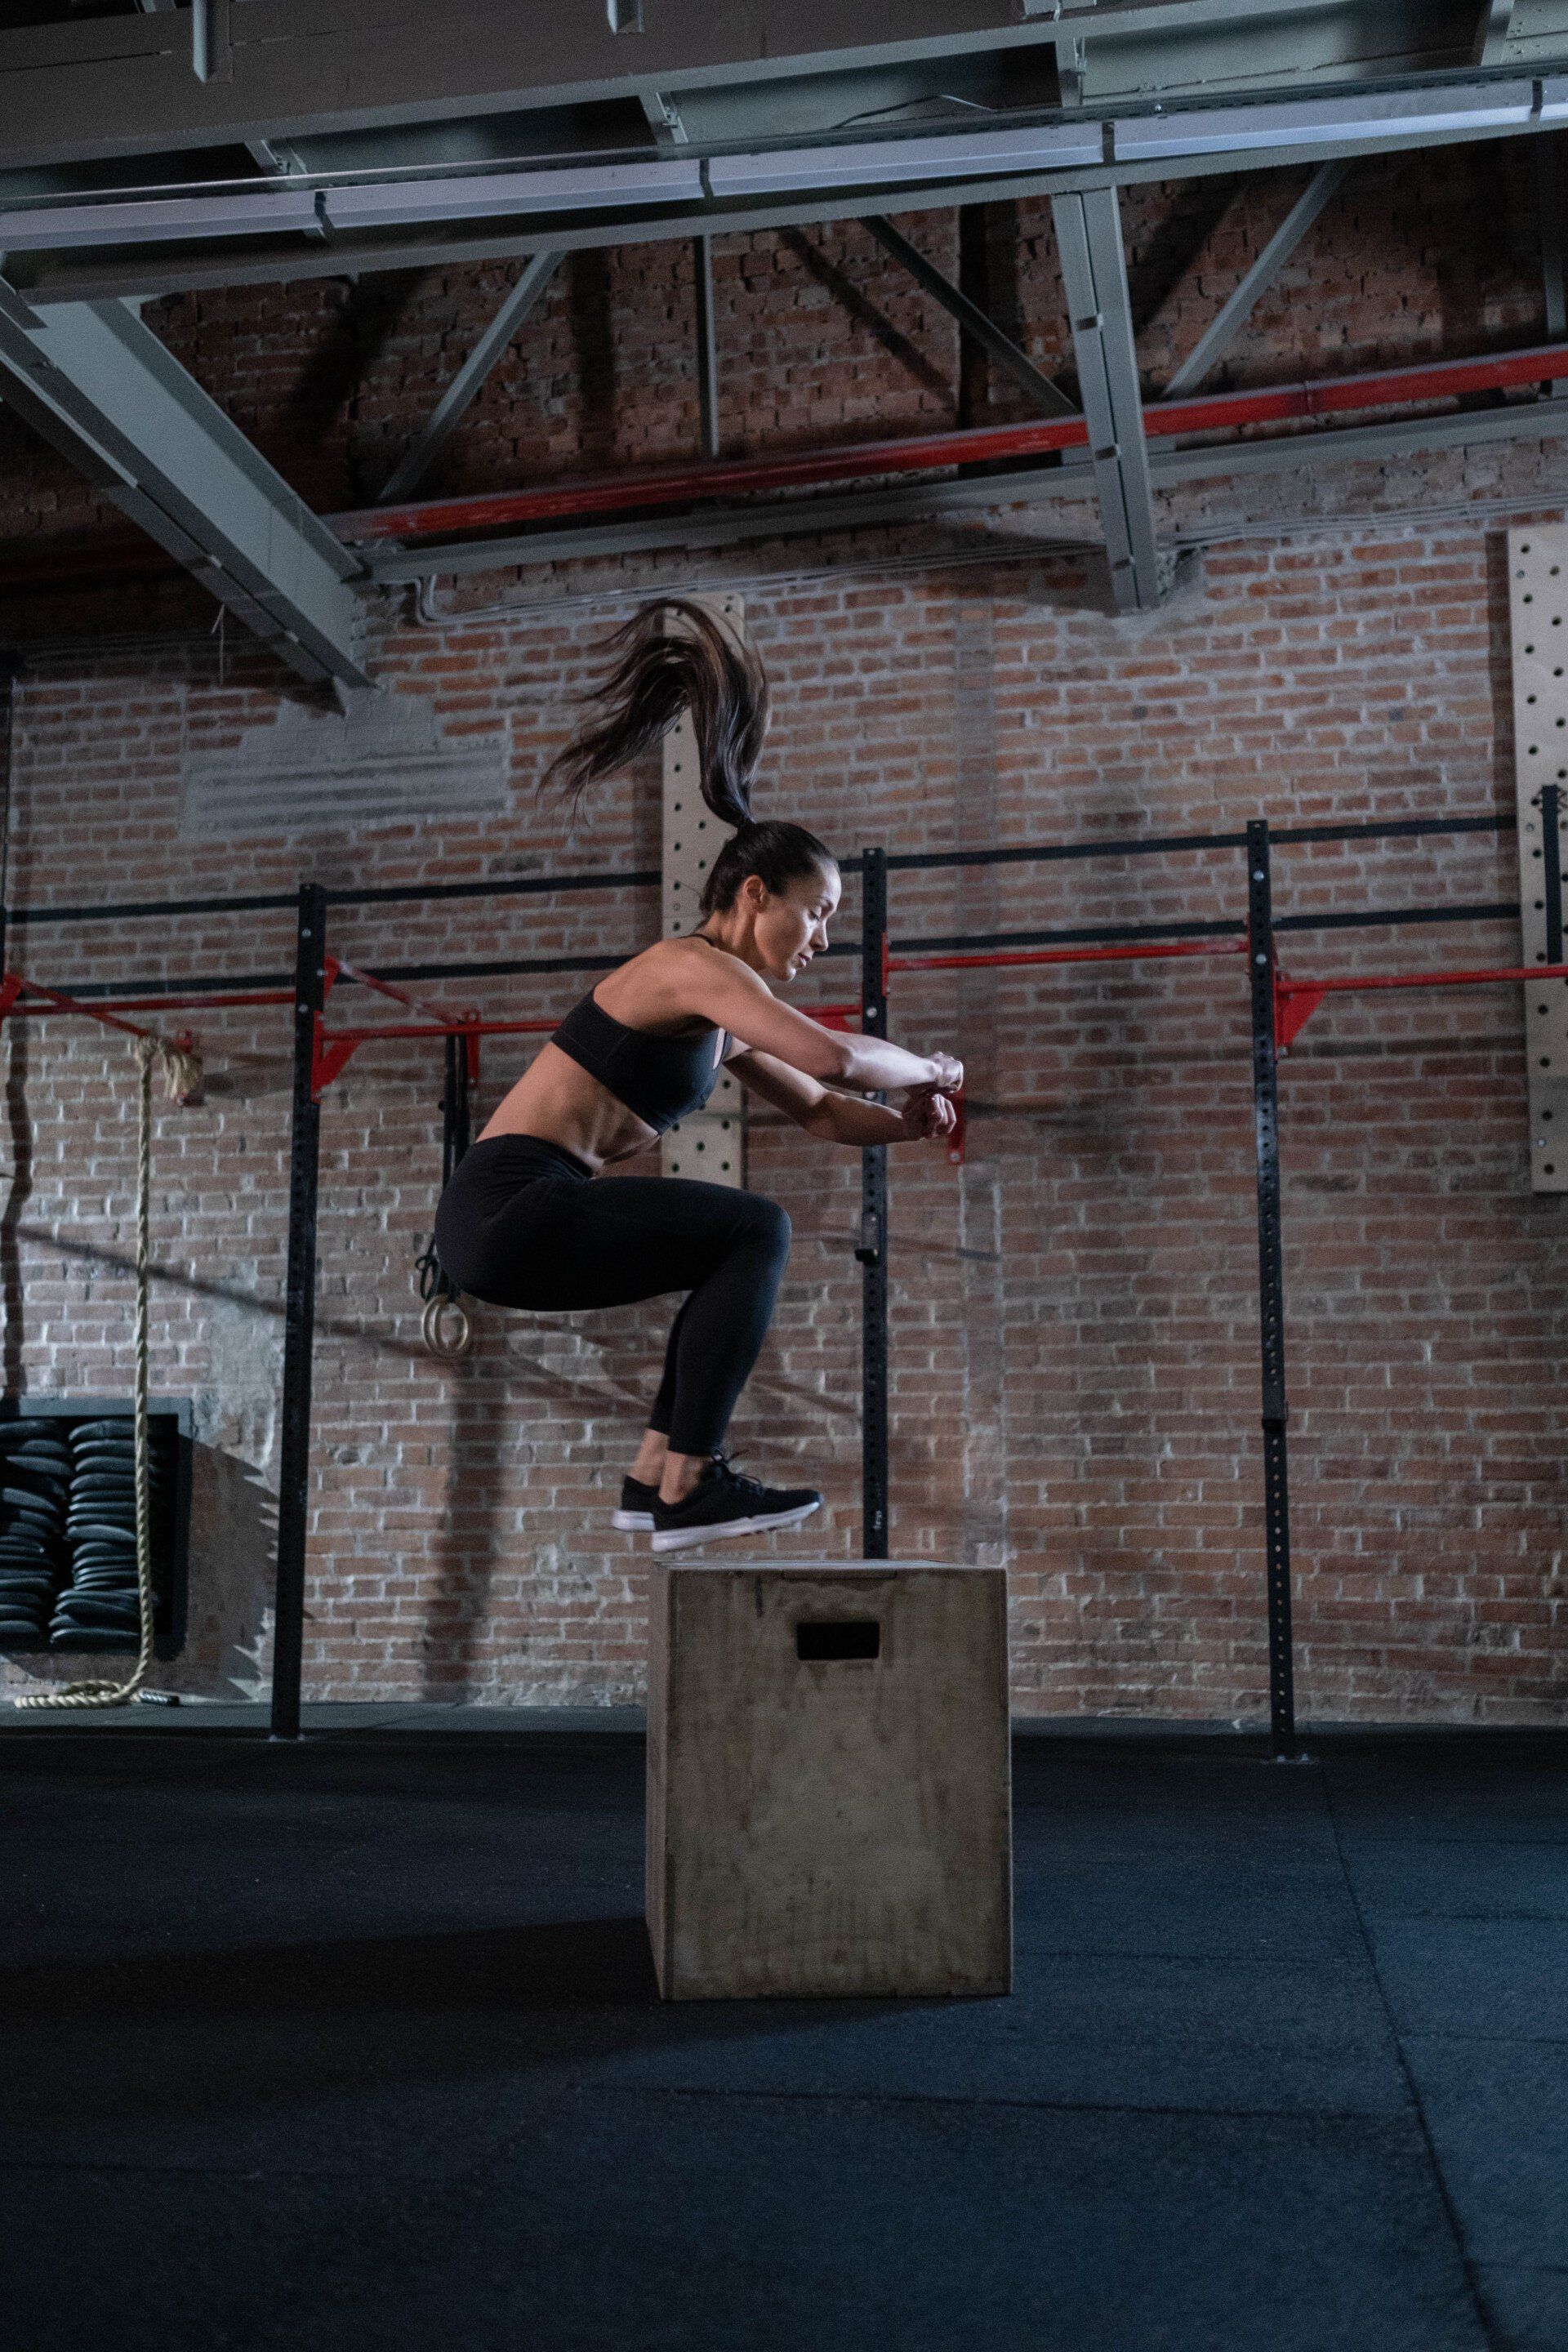 a woman is jumping on a box in a gym .